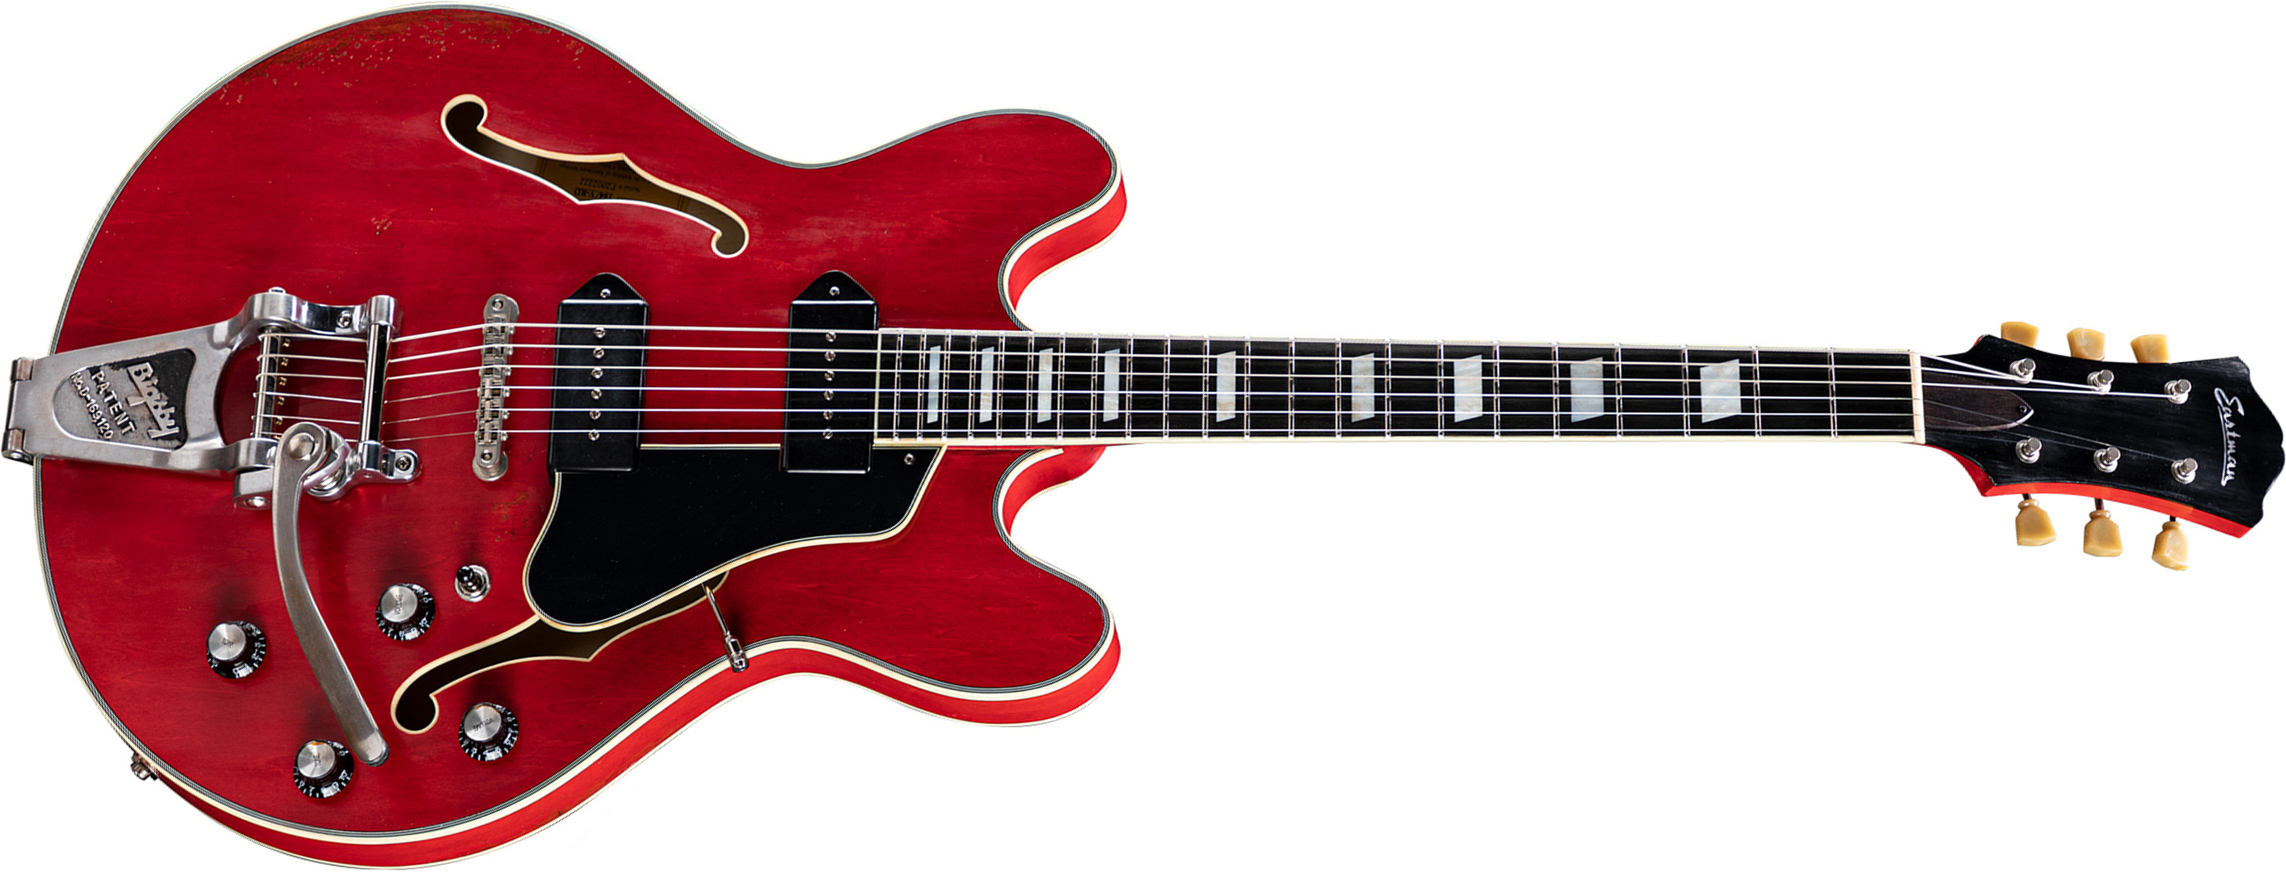 Eastman T64/v Thinline Laminate Tout Erable Bigsby 2p90 Lollar Bigsby Eb - Red - Semi-hollow electric guitar - Main picture